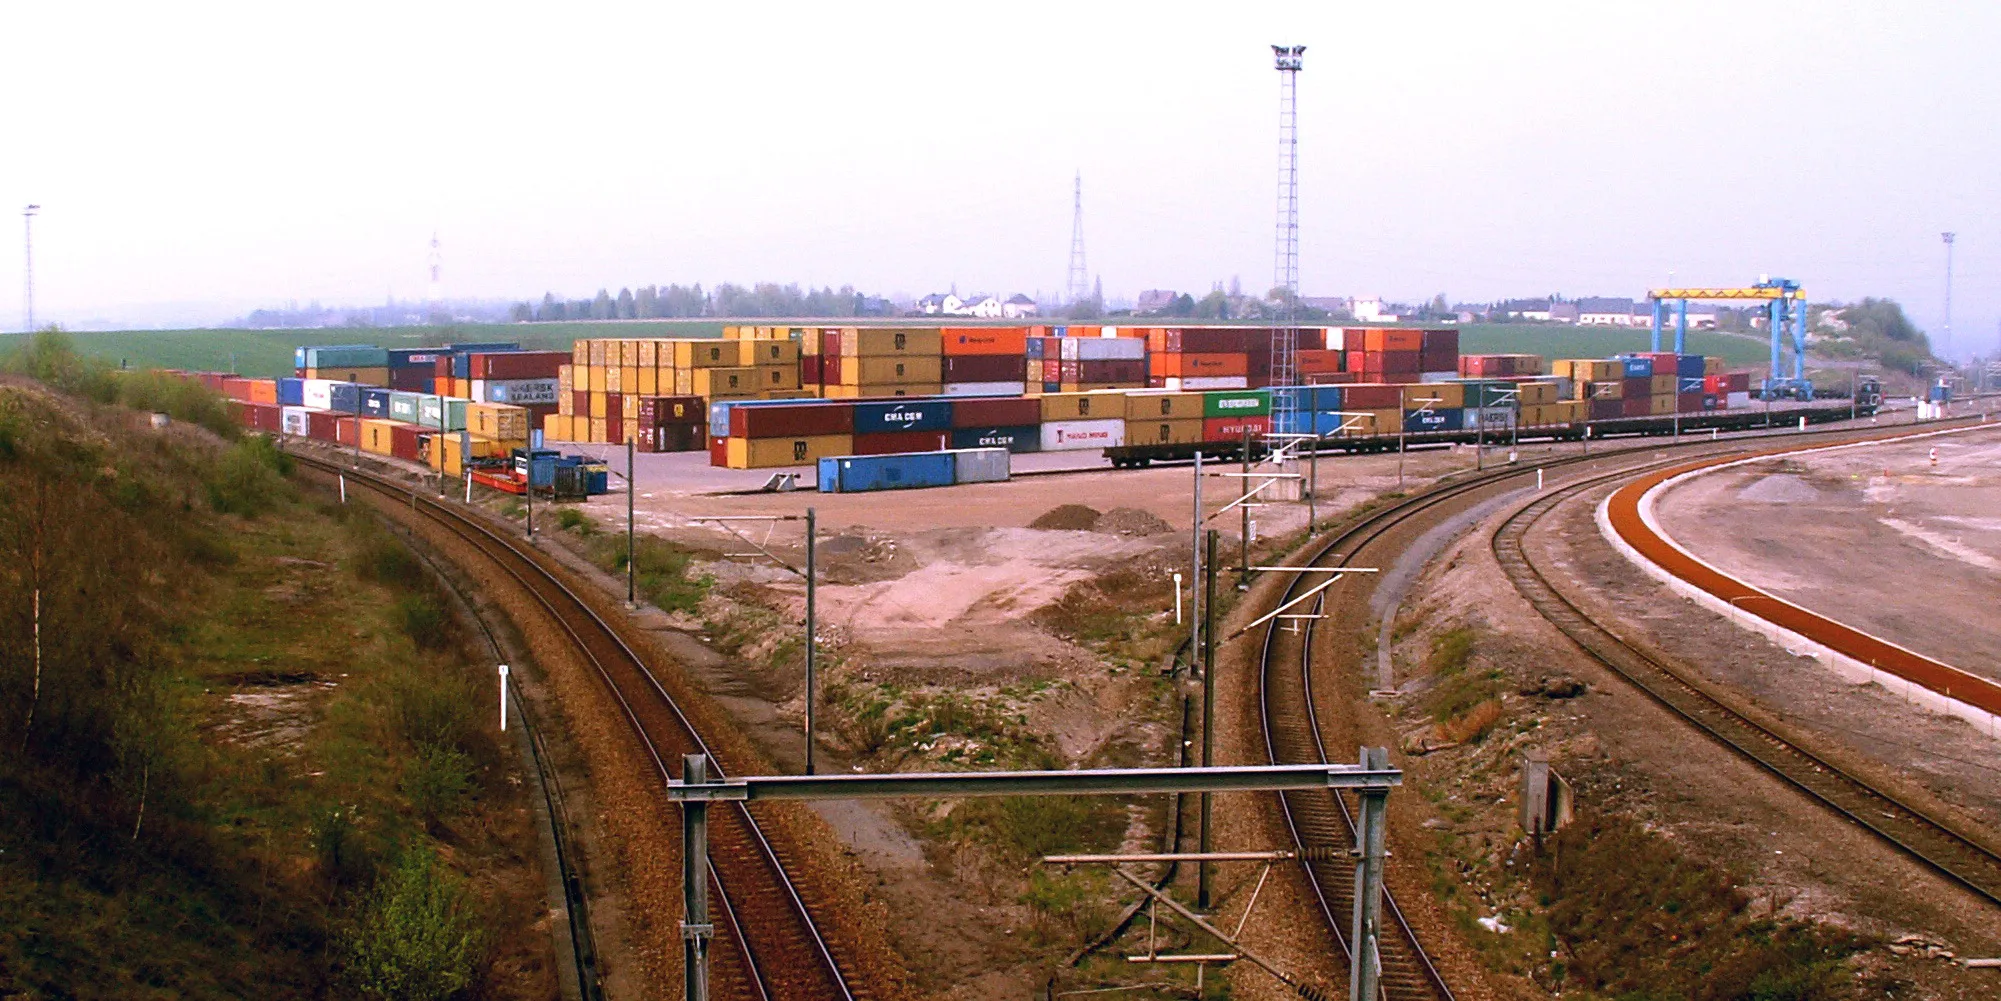 Photo showing: The container Terminal of Athus, as seen from Road N830. The terminal is divided by railway line 167 to Arlon (on the right) and bordered by line 165/1 to Virton (on the left) and line 165 (behind the stacks). Both coming form the Luxembourgian city of Rodange. Photo shows the western zone of the terminal. A second (eastern) zone is available, but out of the photograph. This configuration was visible between 2004 and 2019, and updated to allow a new branch (Line 165/3 to Mont-Saint Martin)